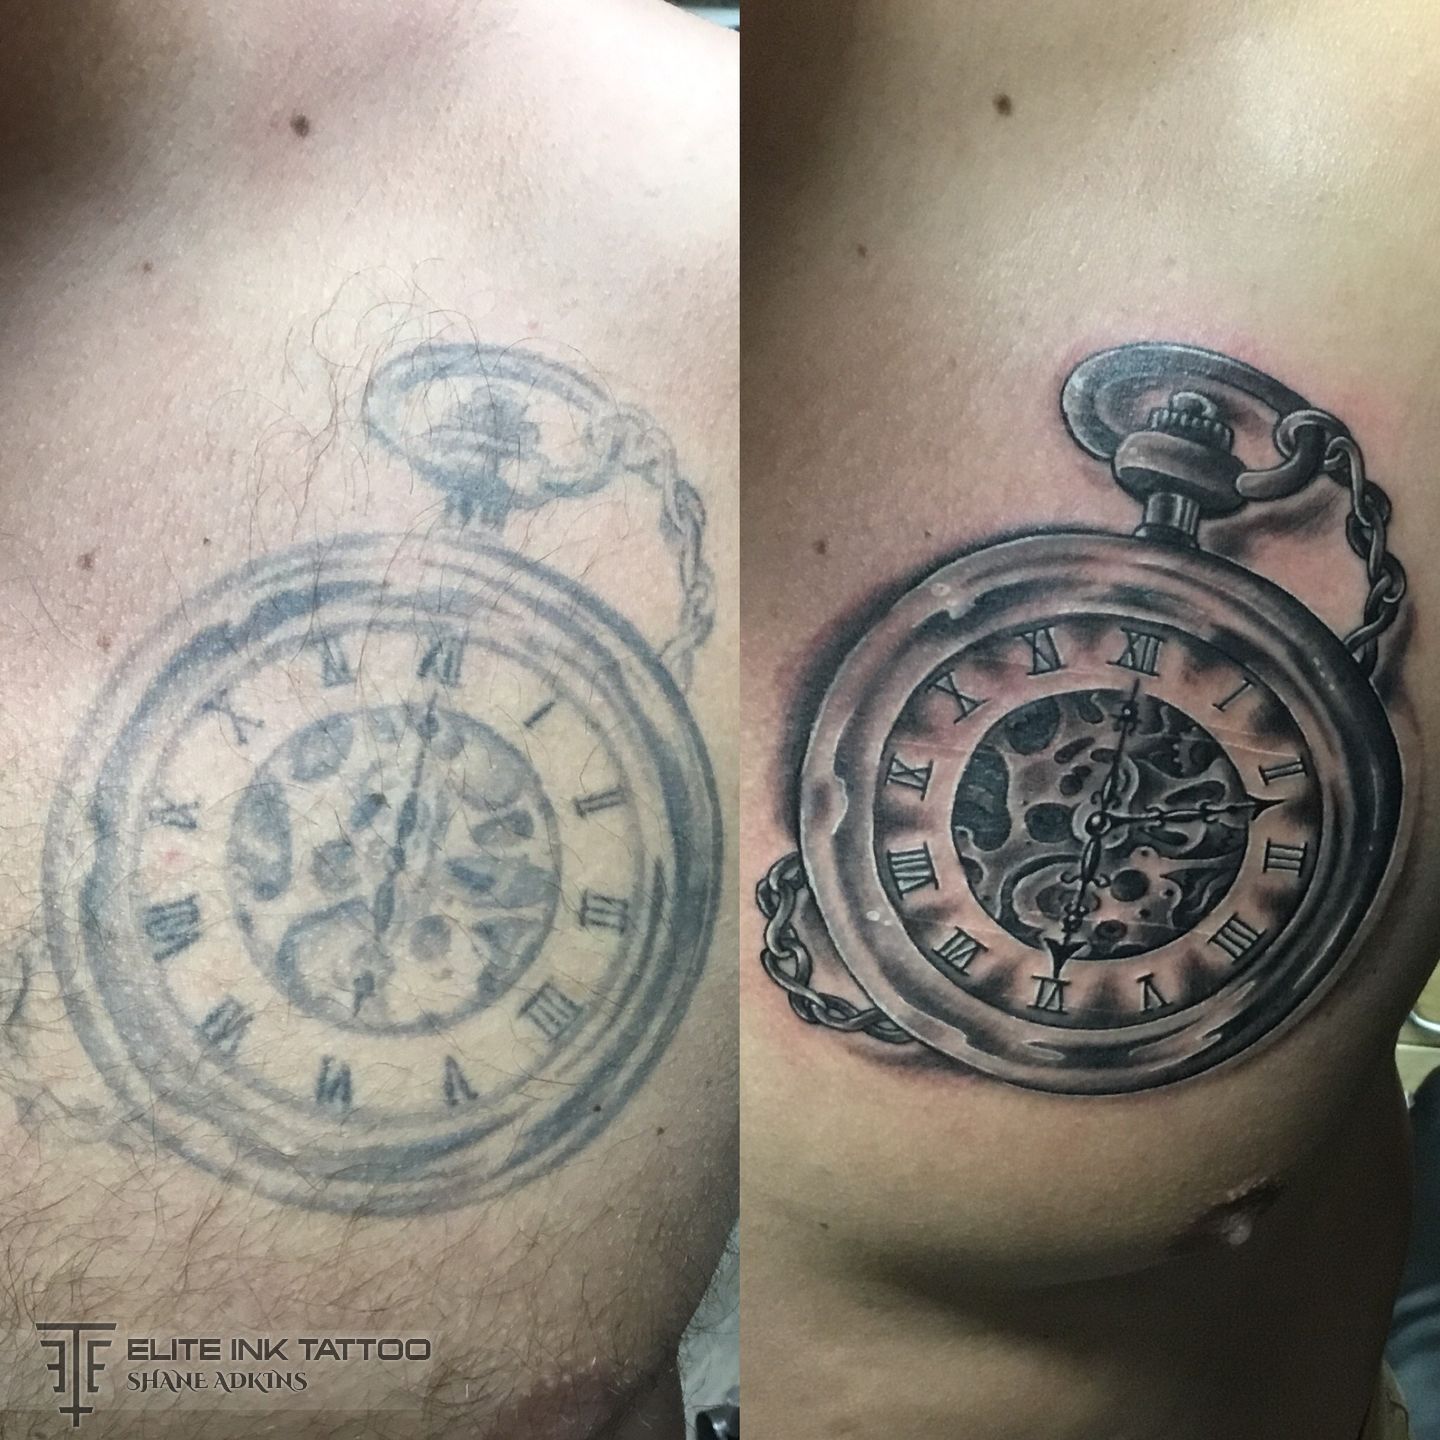 Tattoo rework • original tattoo not by me • in the first session we broke  up the blurring writing with white highlights to make it mo... | Instagram